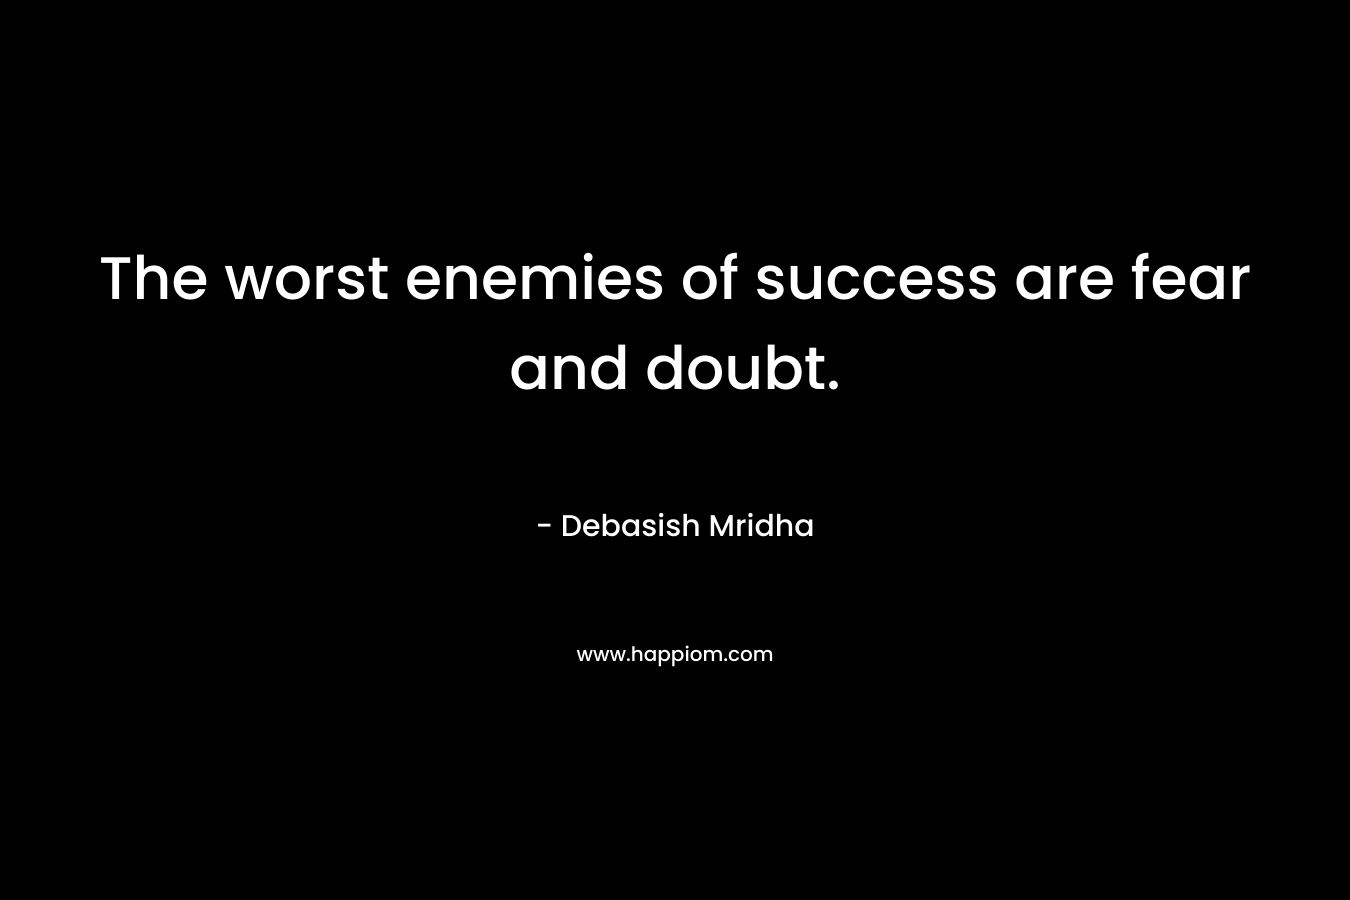 The worst enemies of success are fear and doubt.